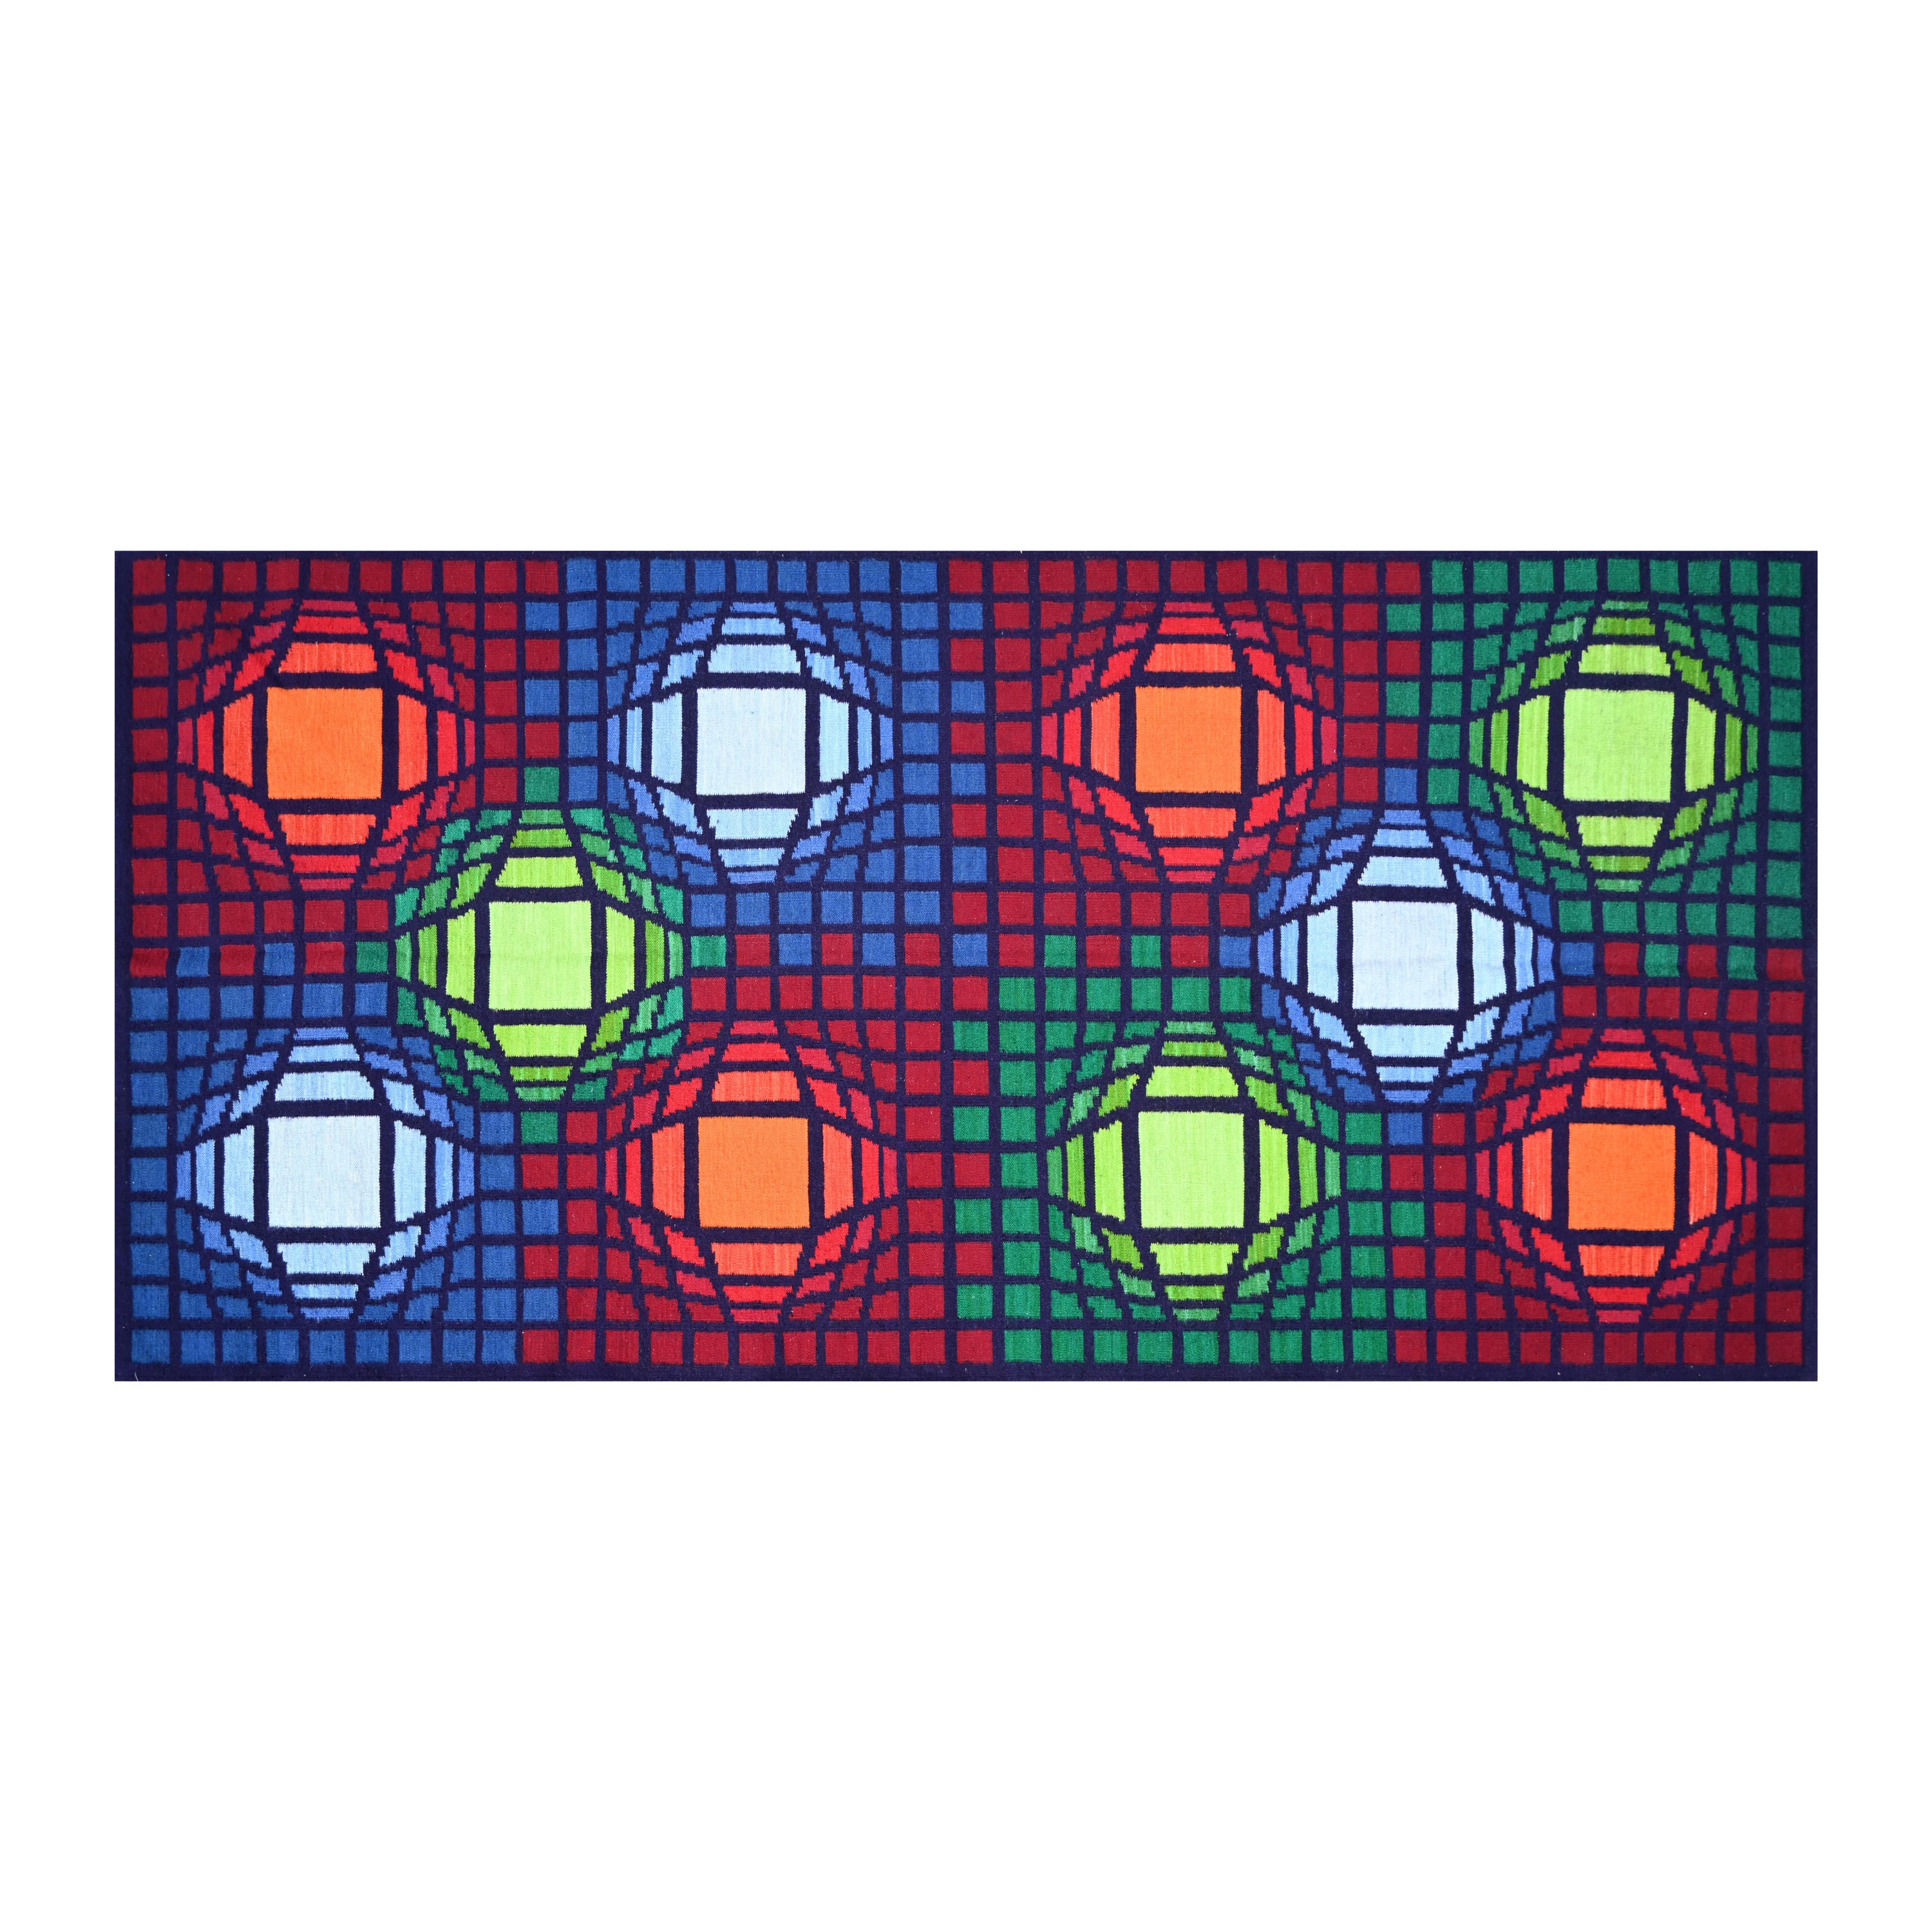 Kinetic Tapestry LM1985 Signed Jakubczyk - In the style of Vasarely - No. 1377